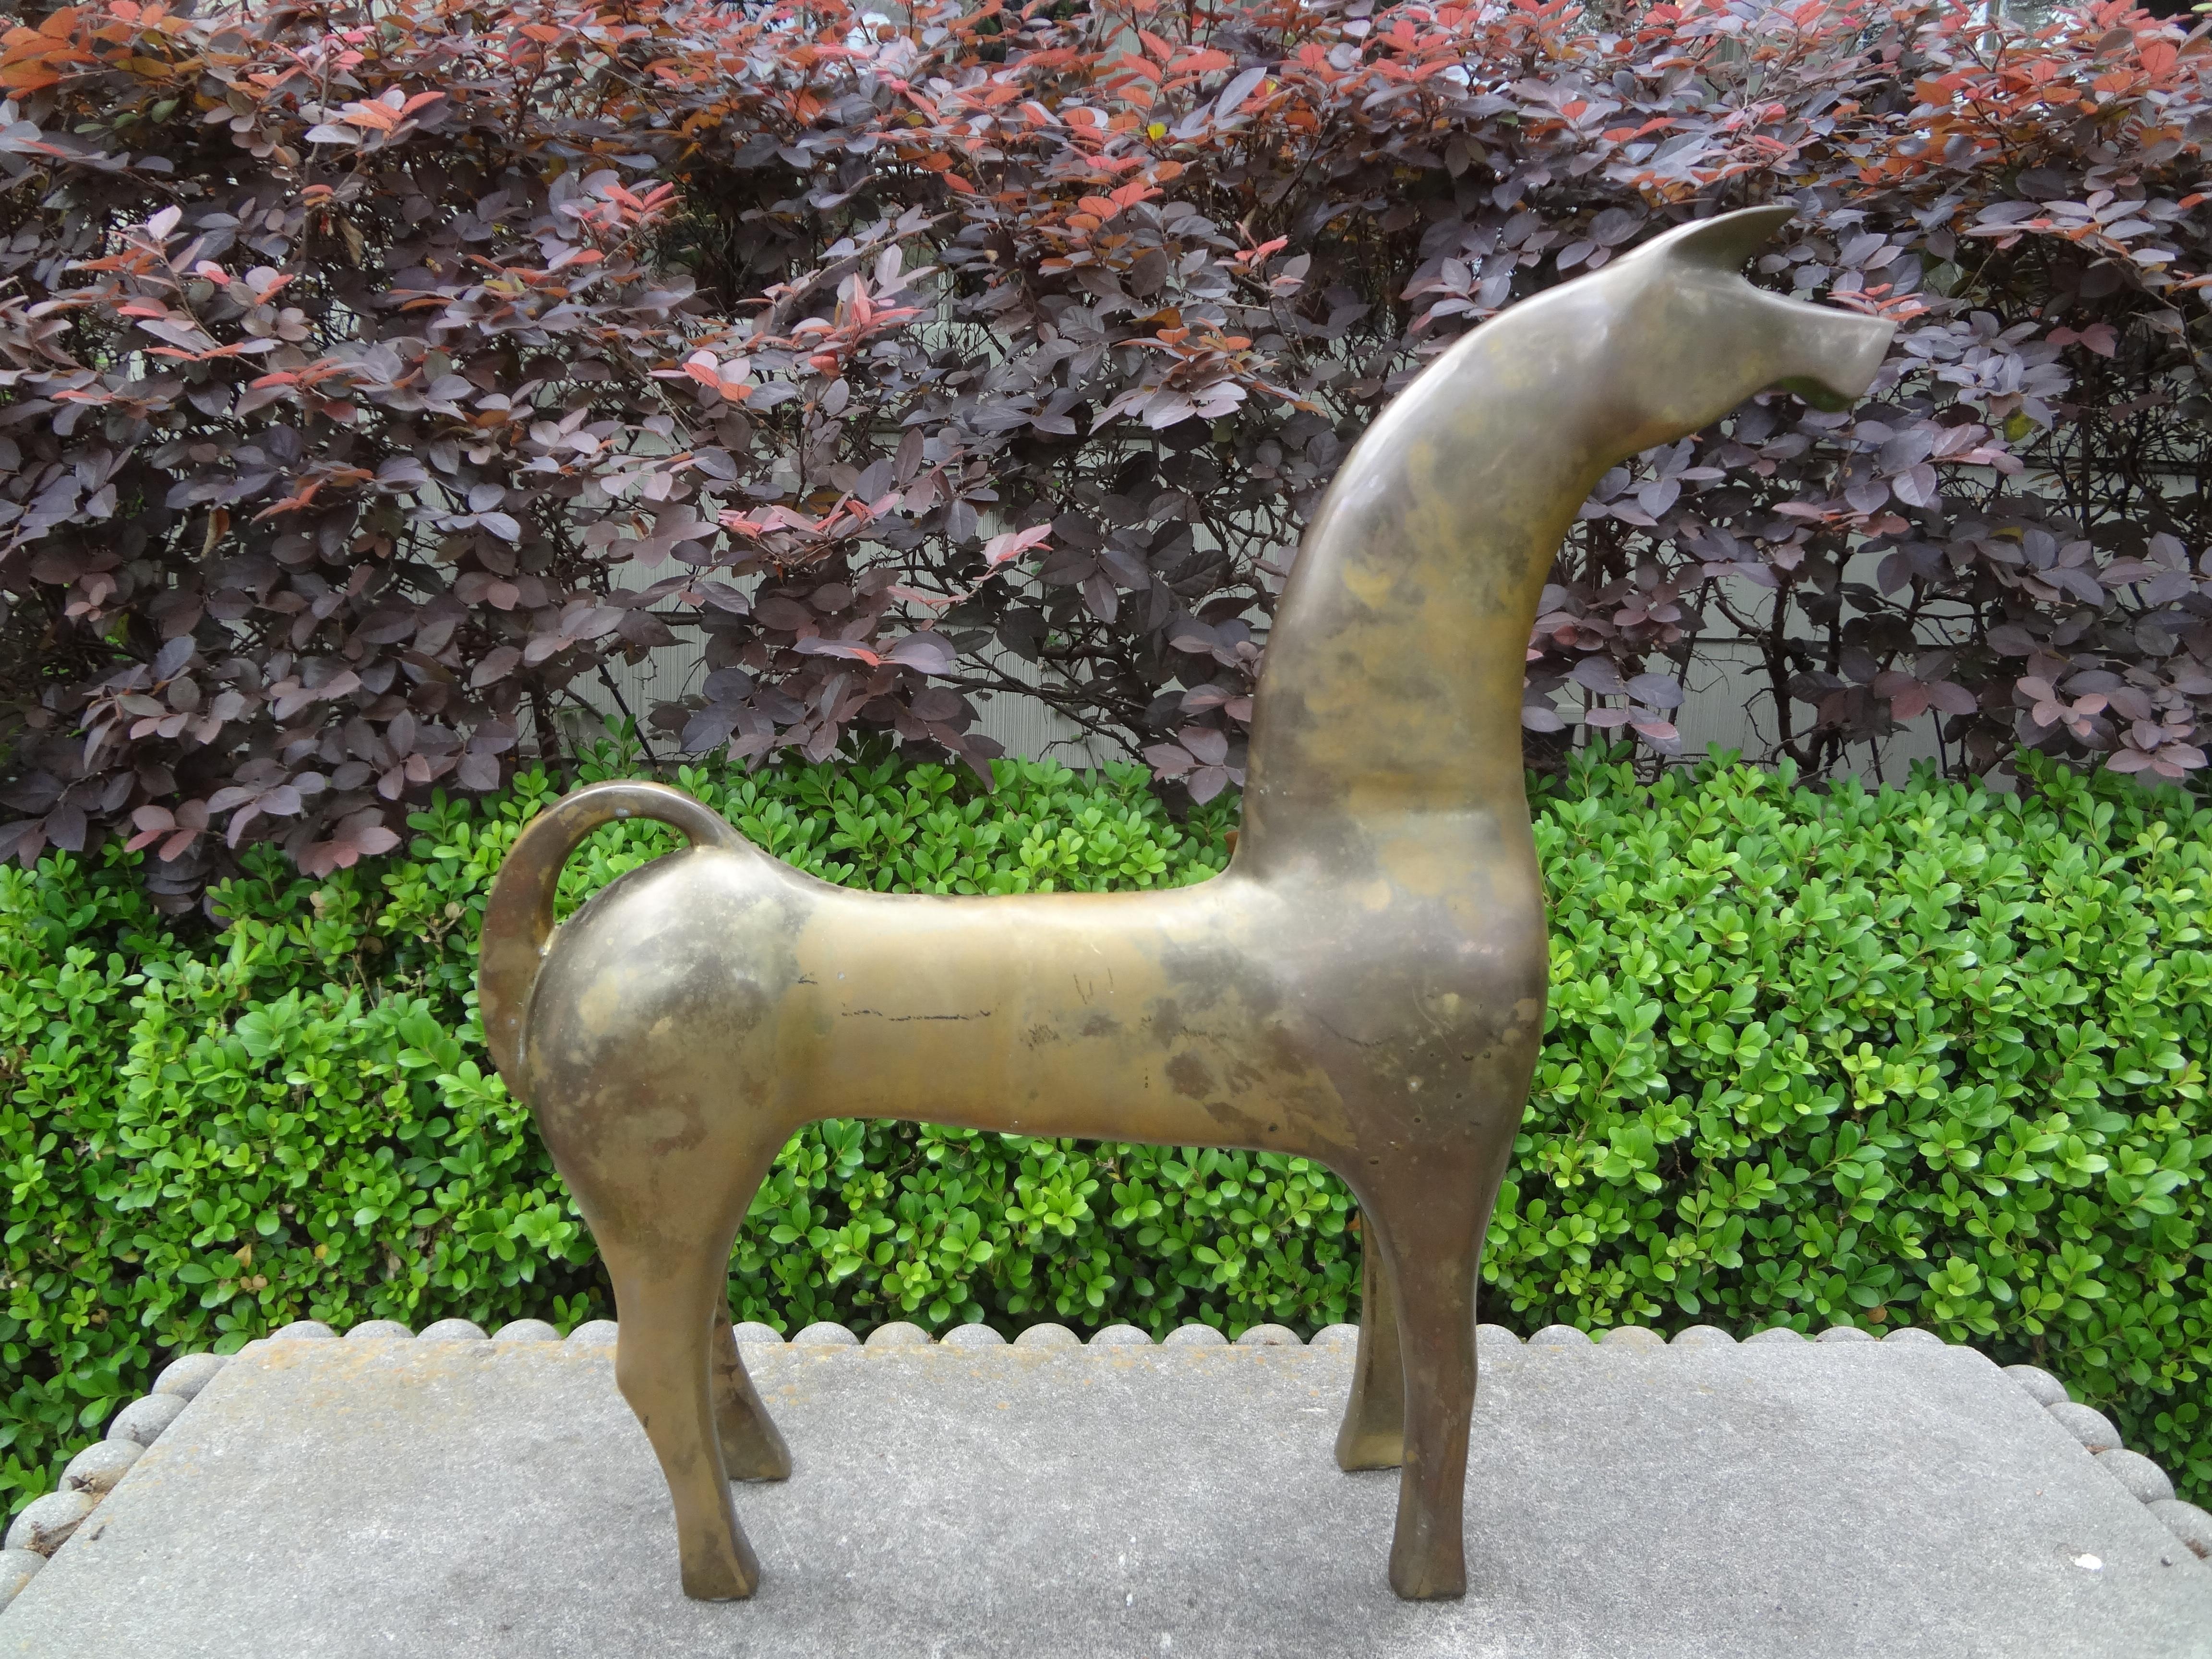 Large Modernist Etruscan brass horse sculpture.
Stunning large Gio Ponti inspired Modernist Etruscan brass horse sculpture. Our Mid-Century Modern brass horse figure or sculpture stands in a sleek graceful almost cubist style.
Fantastic bookcase or